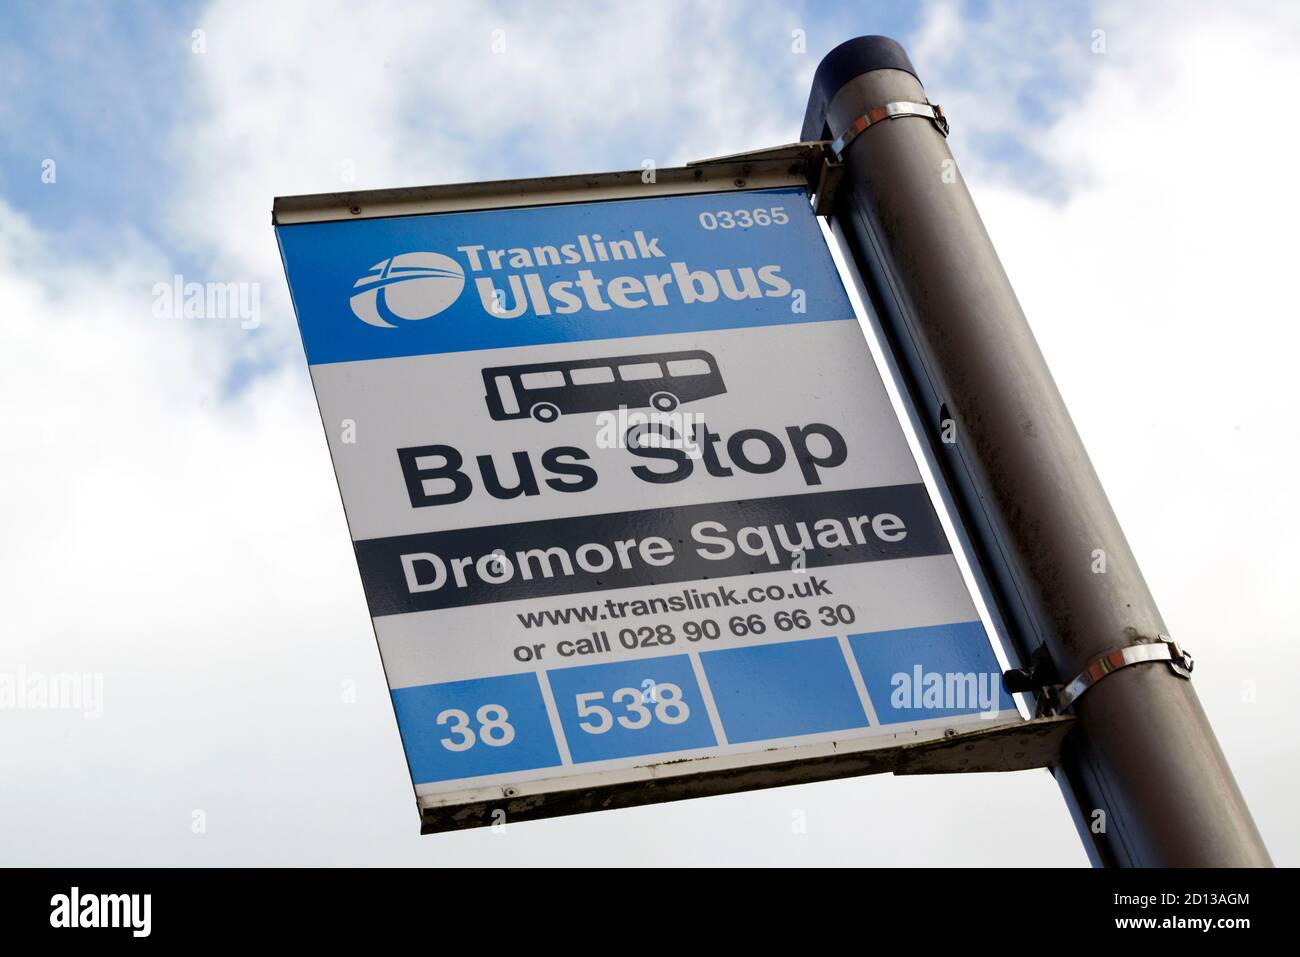 Ulsterbus bus stop at the small village of Dromore, County Down, Northern Ireland, UK Stock Photo